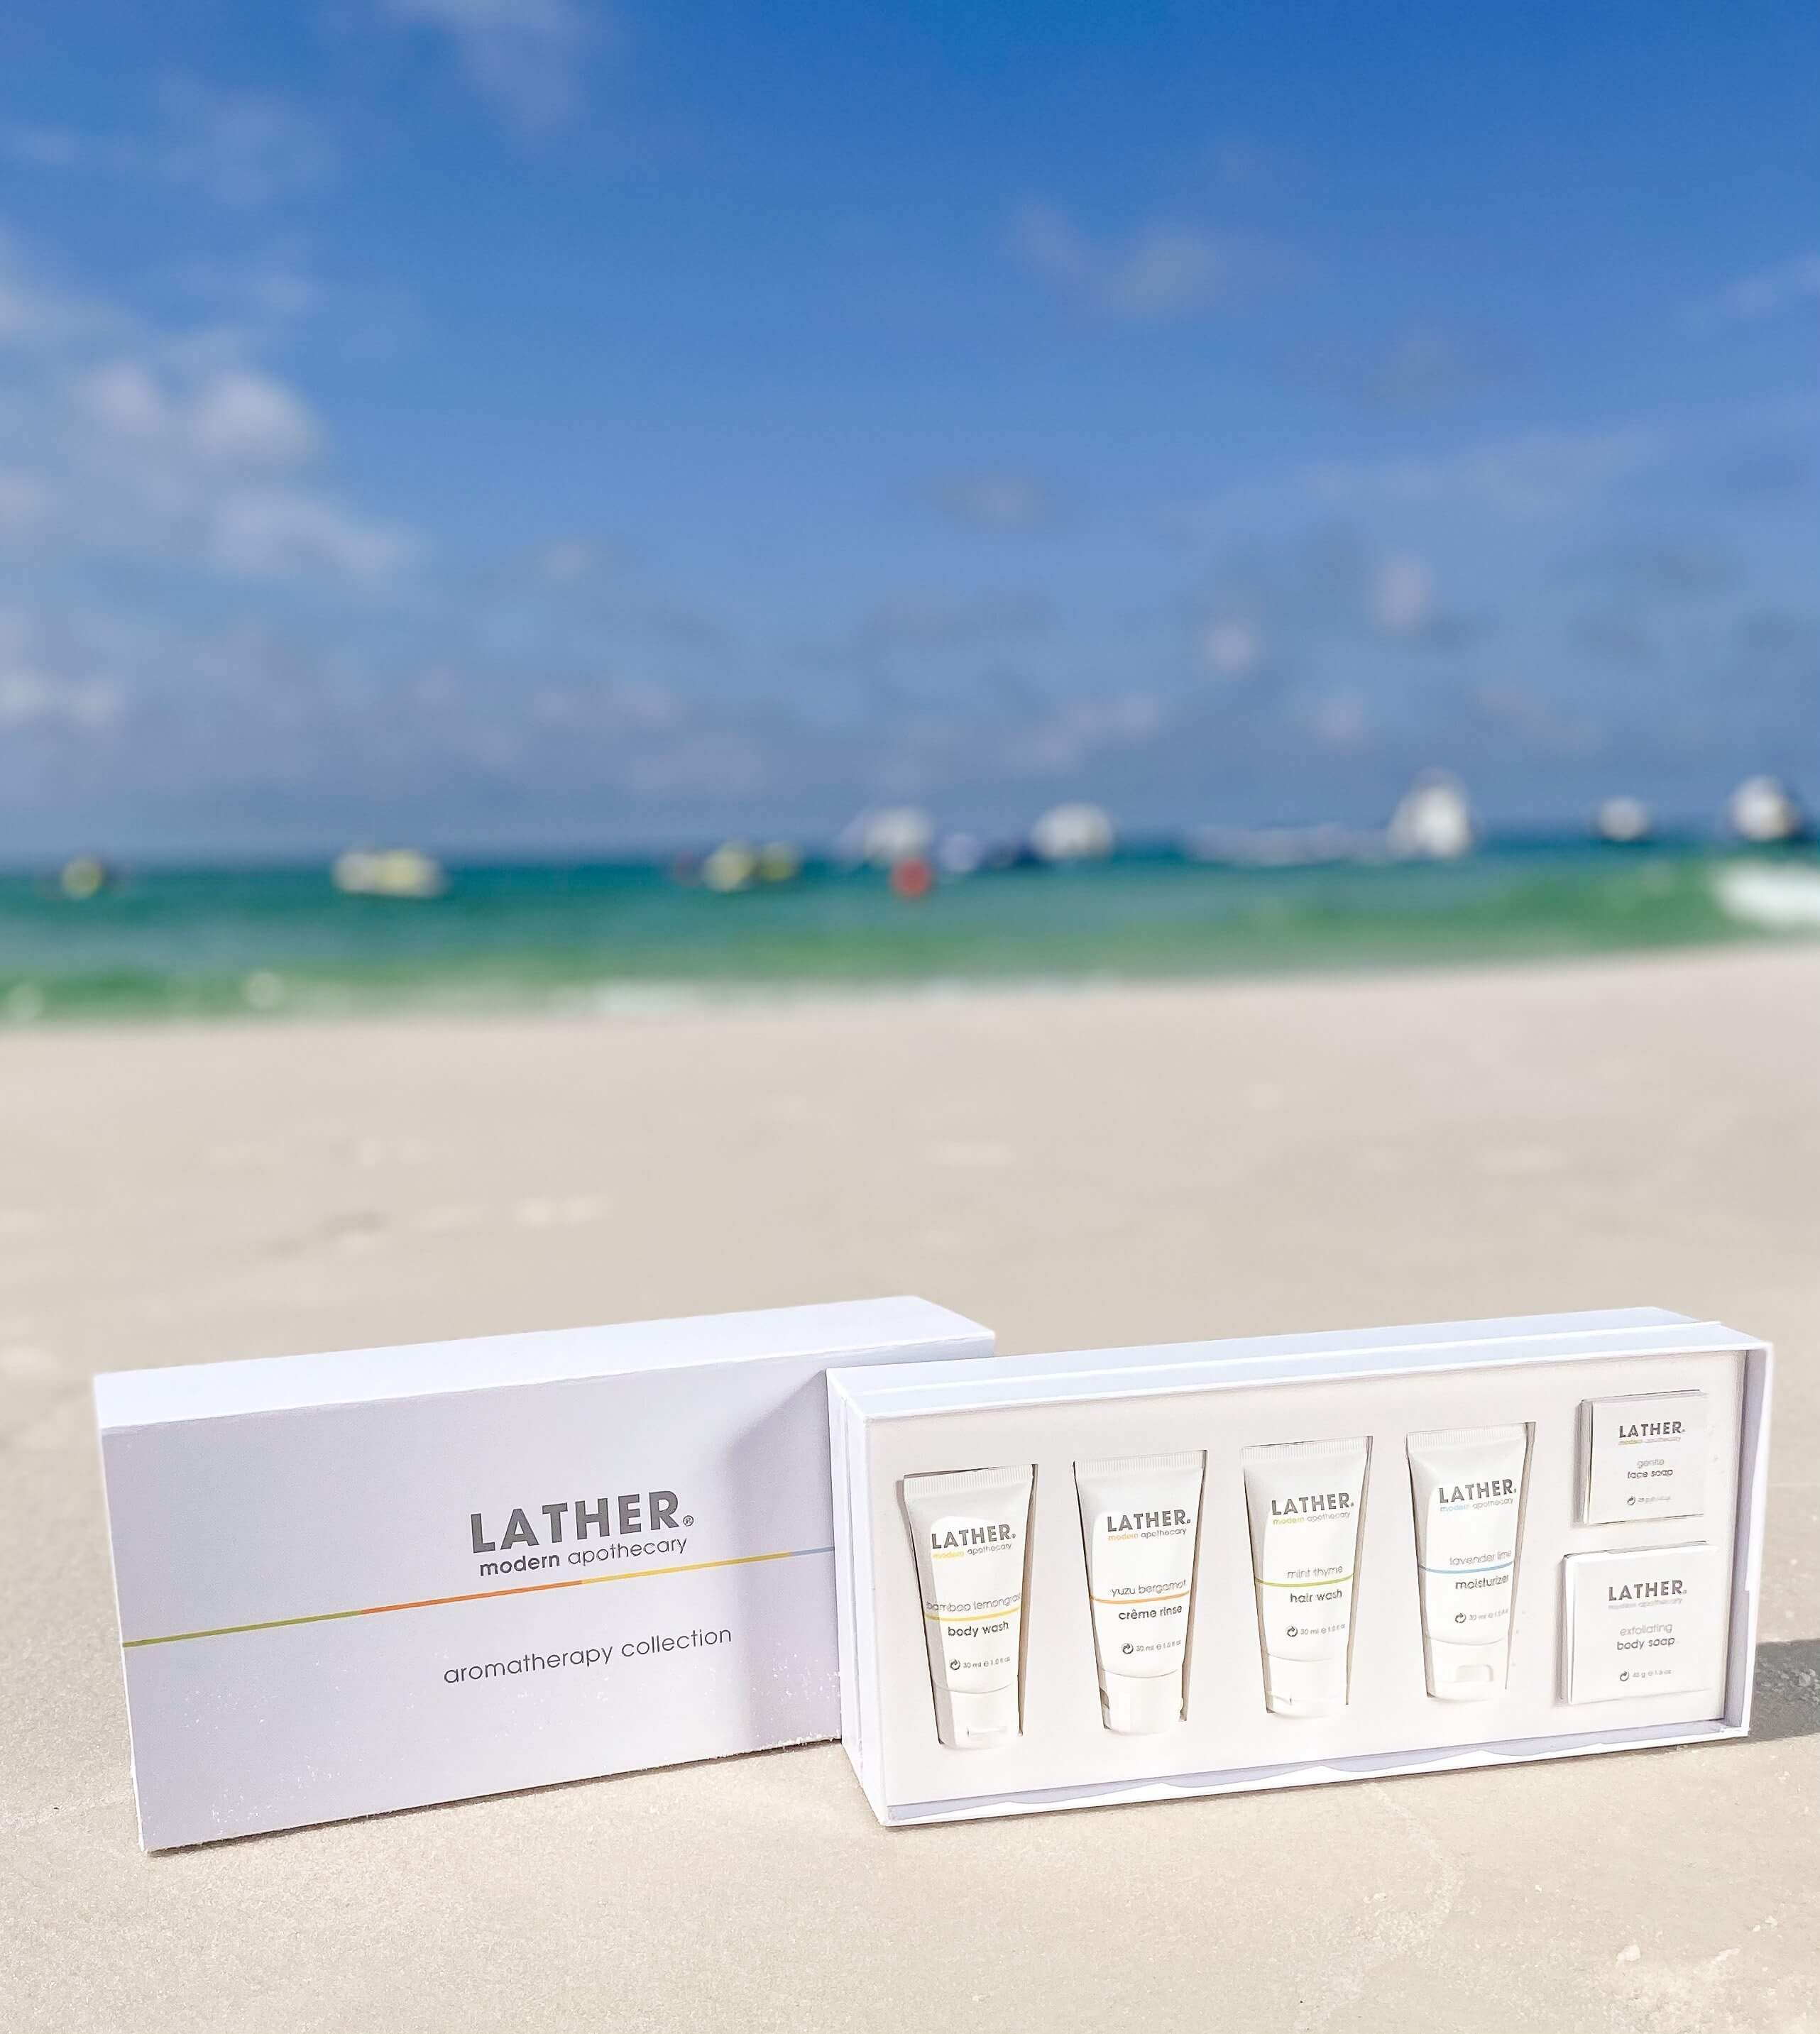 Lather Products on the Beach